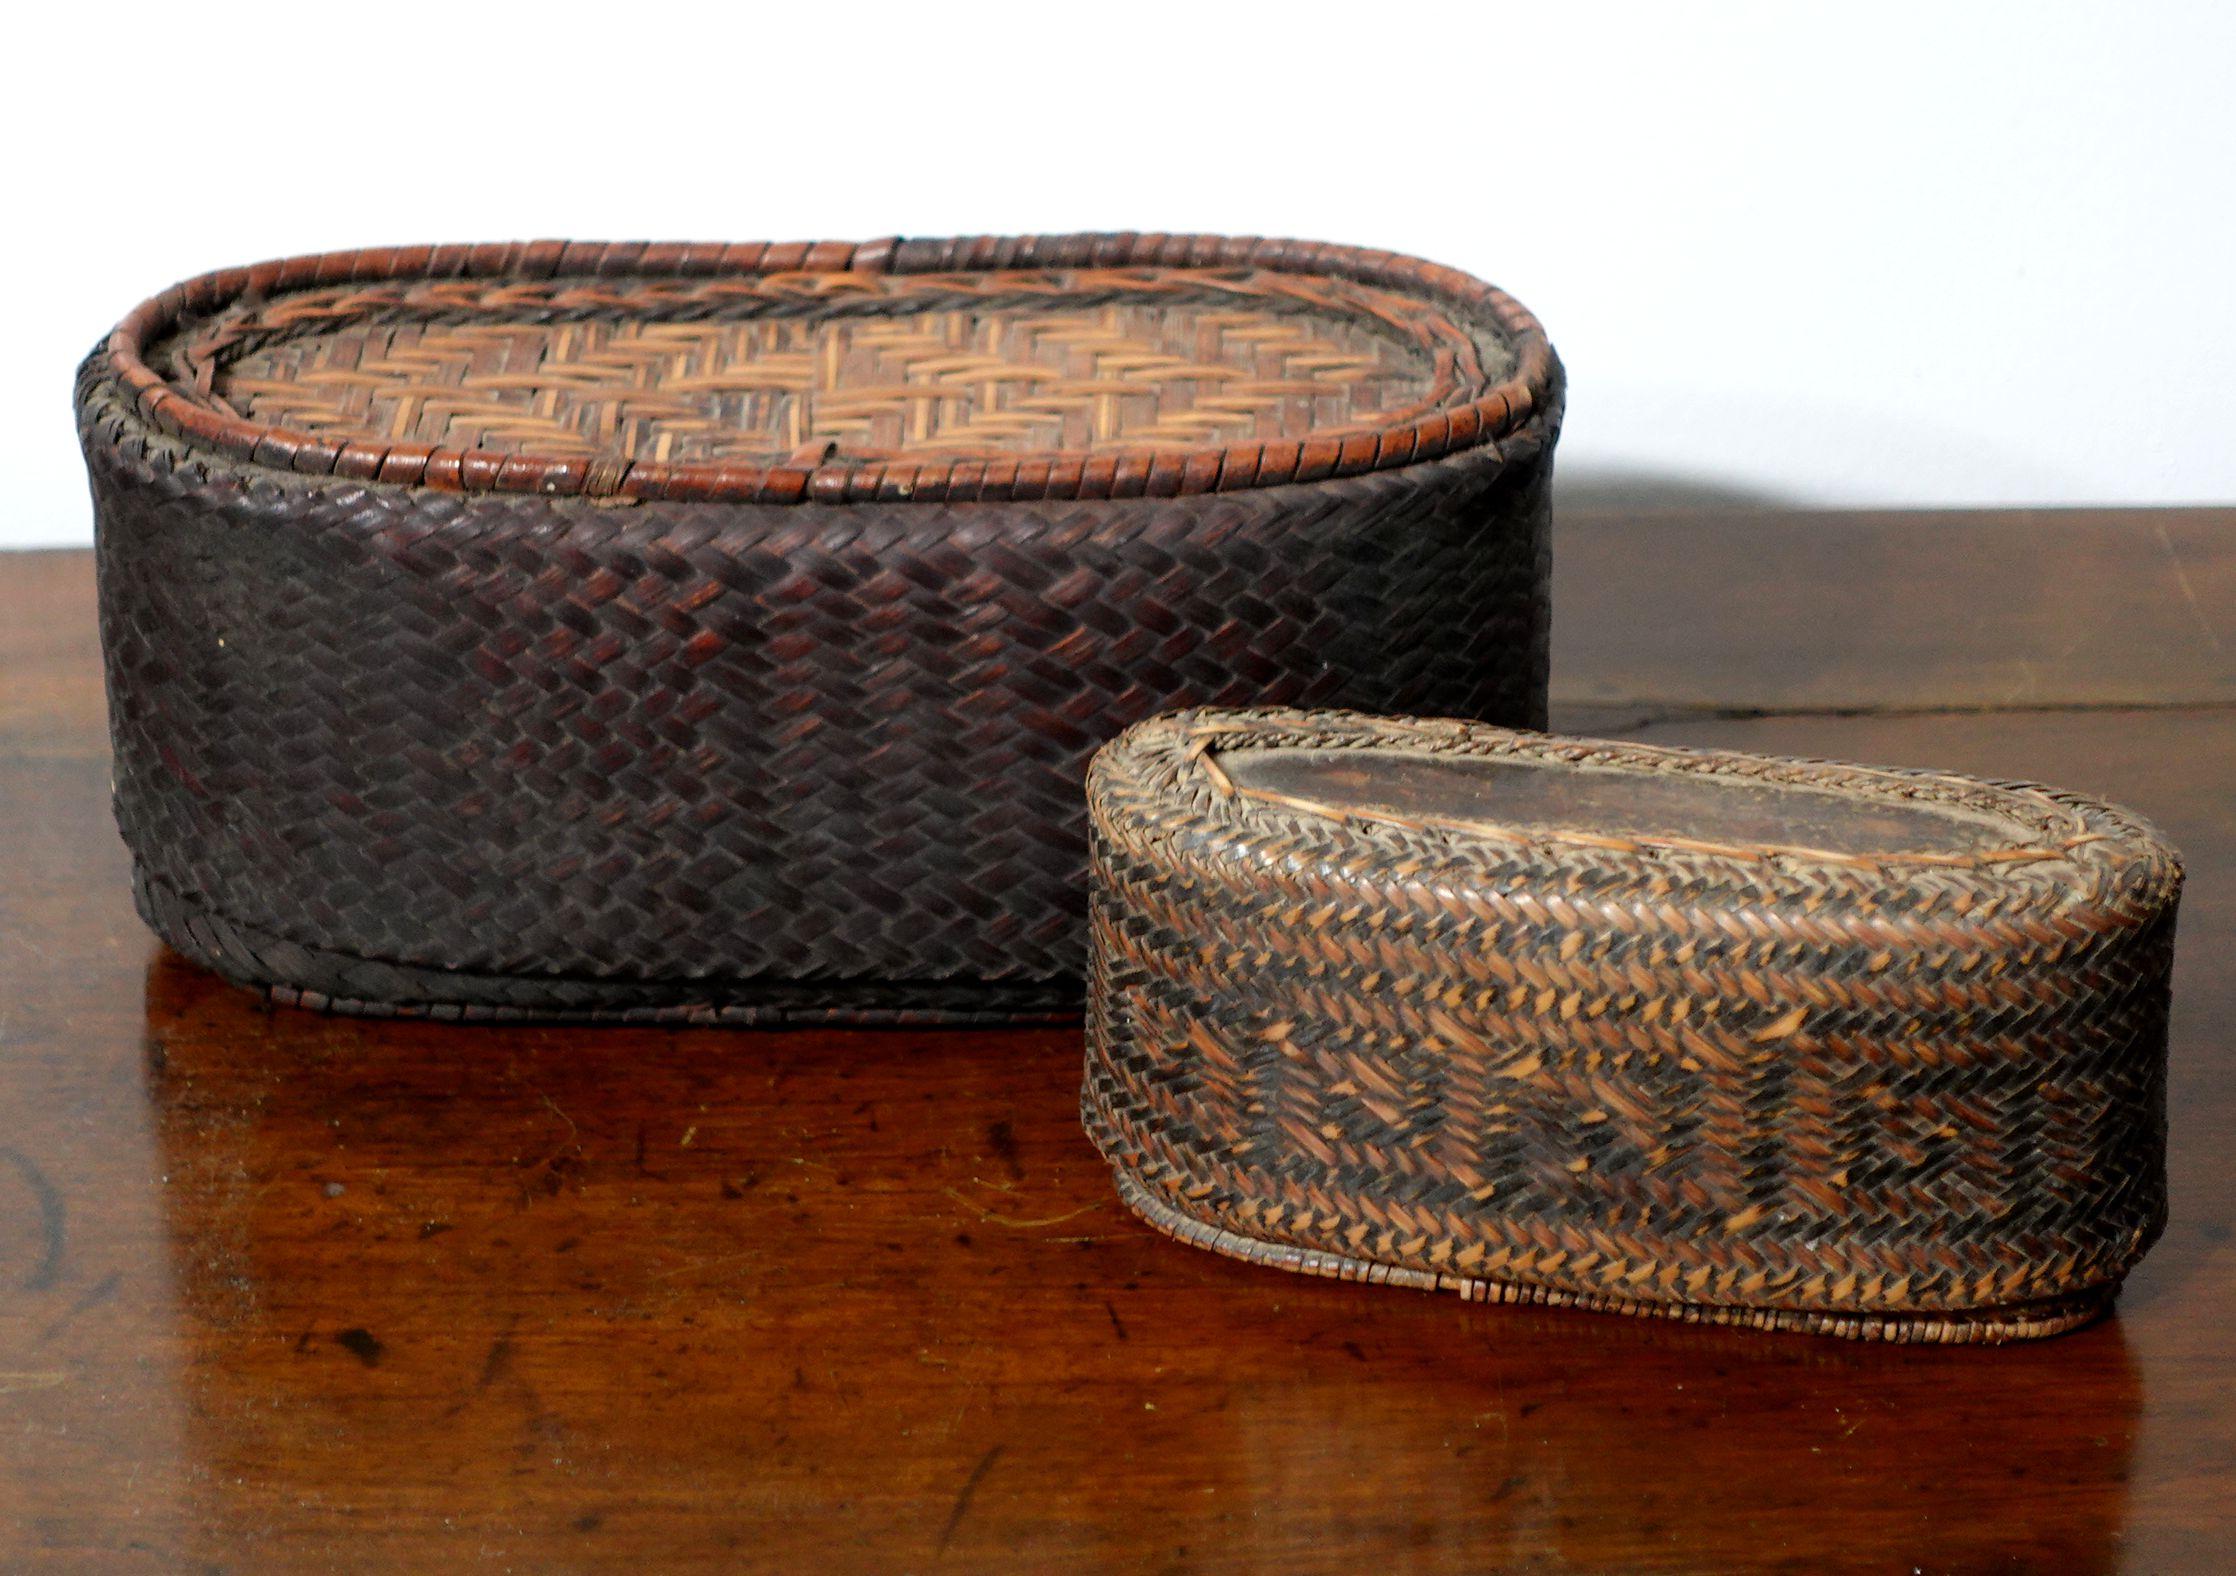 Two woven bamboo strip boxes, including one with leather details and geometric decorations,
Dimensions:
1. 8.75